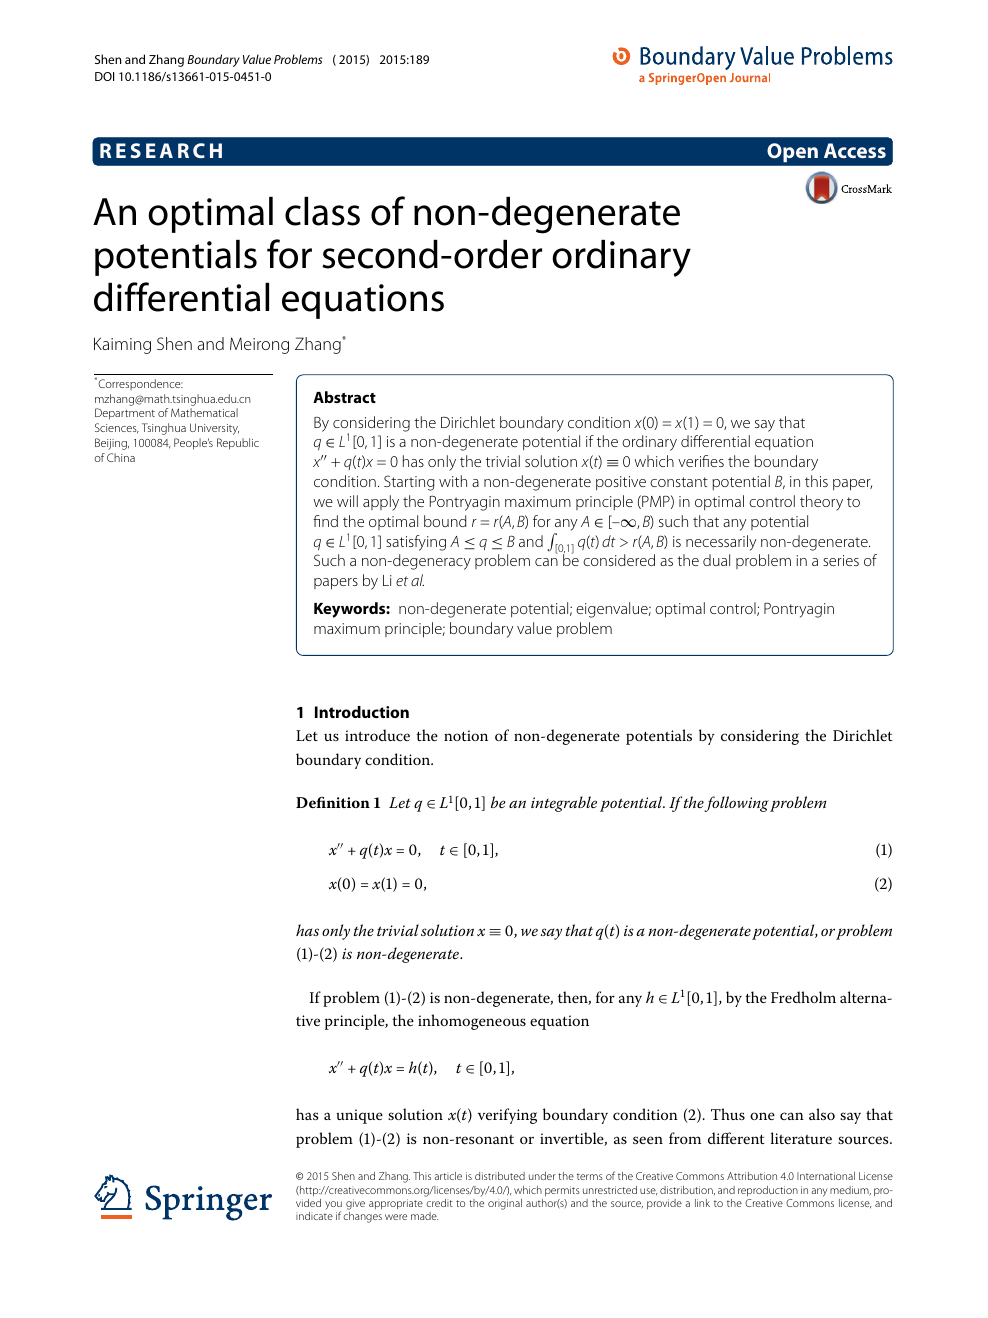 An Optimal Class Of Non Degenerate Potentials For Second Order Ordinary Differential Equations Topic Of Research Paper In Mathematics Download Scholarly Article Pdf And Read For Free On Cyberleninka Open Science Hub